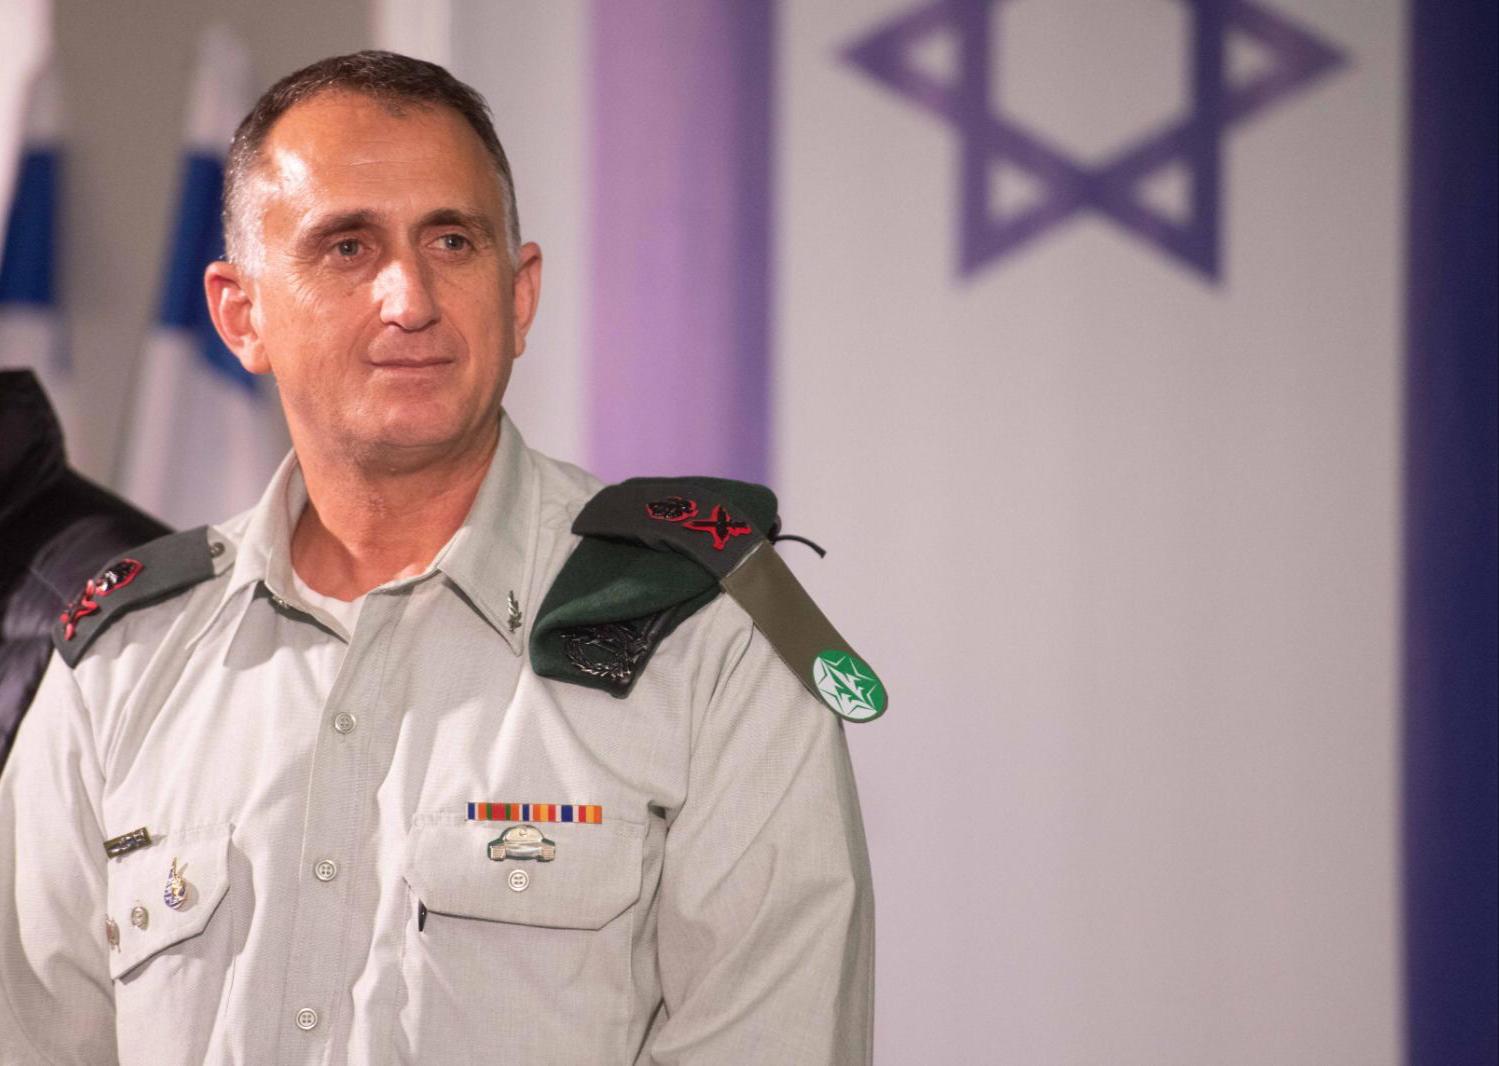 Major General (RES.) Tamir Hayman, The Chair of the Institute for National Security Studies (INSS). PHOTO: Wikimedia Commons.